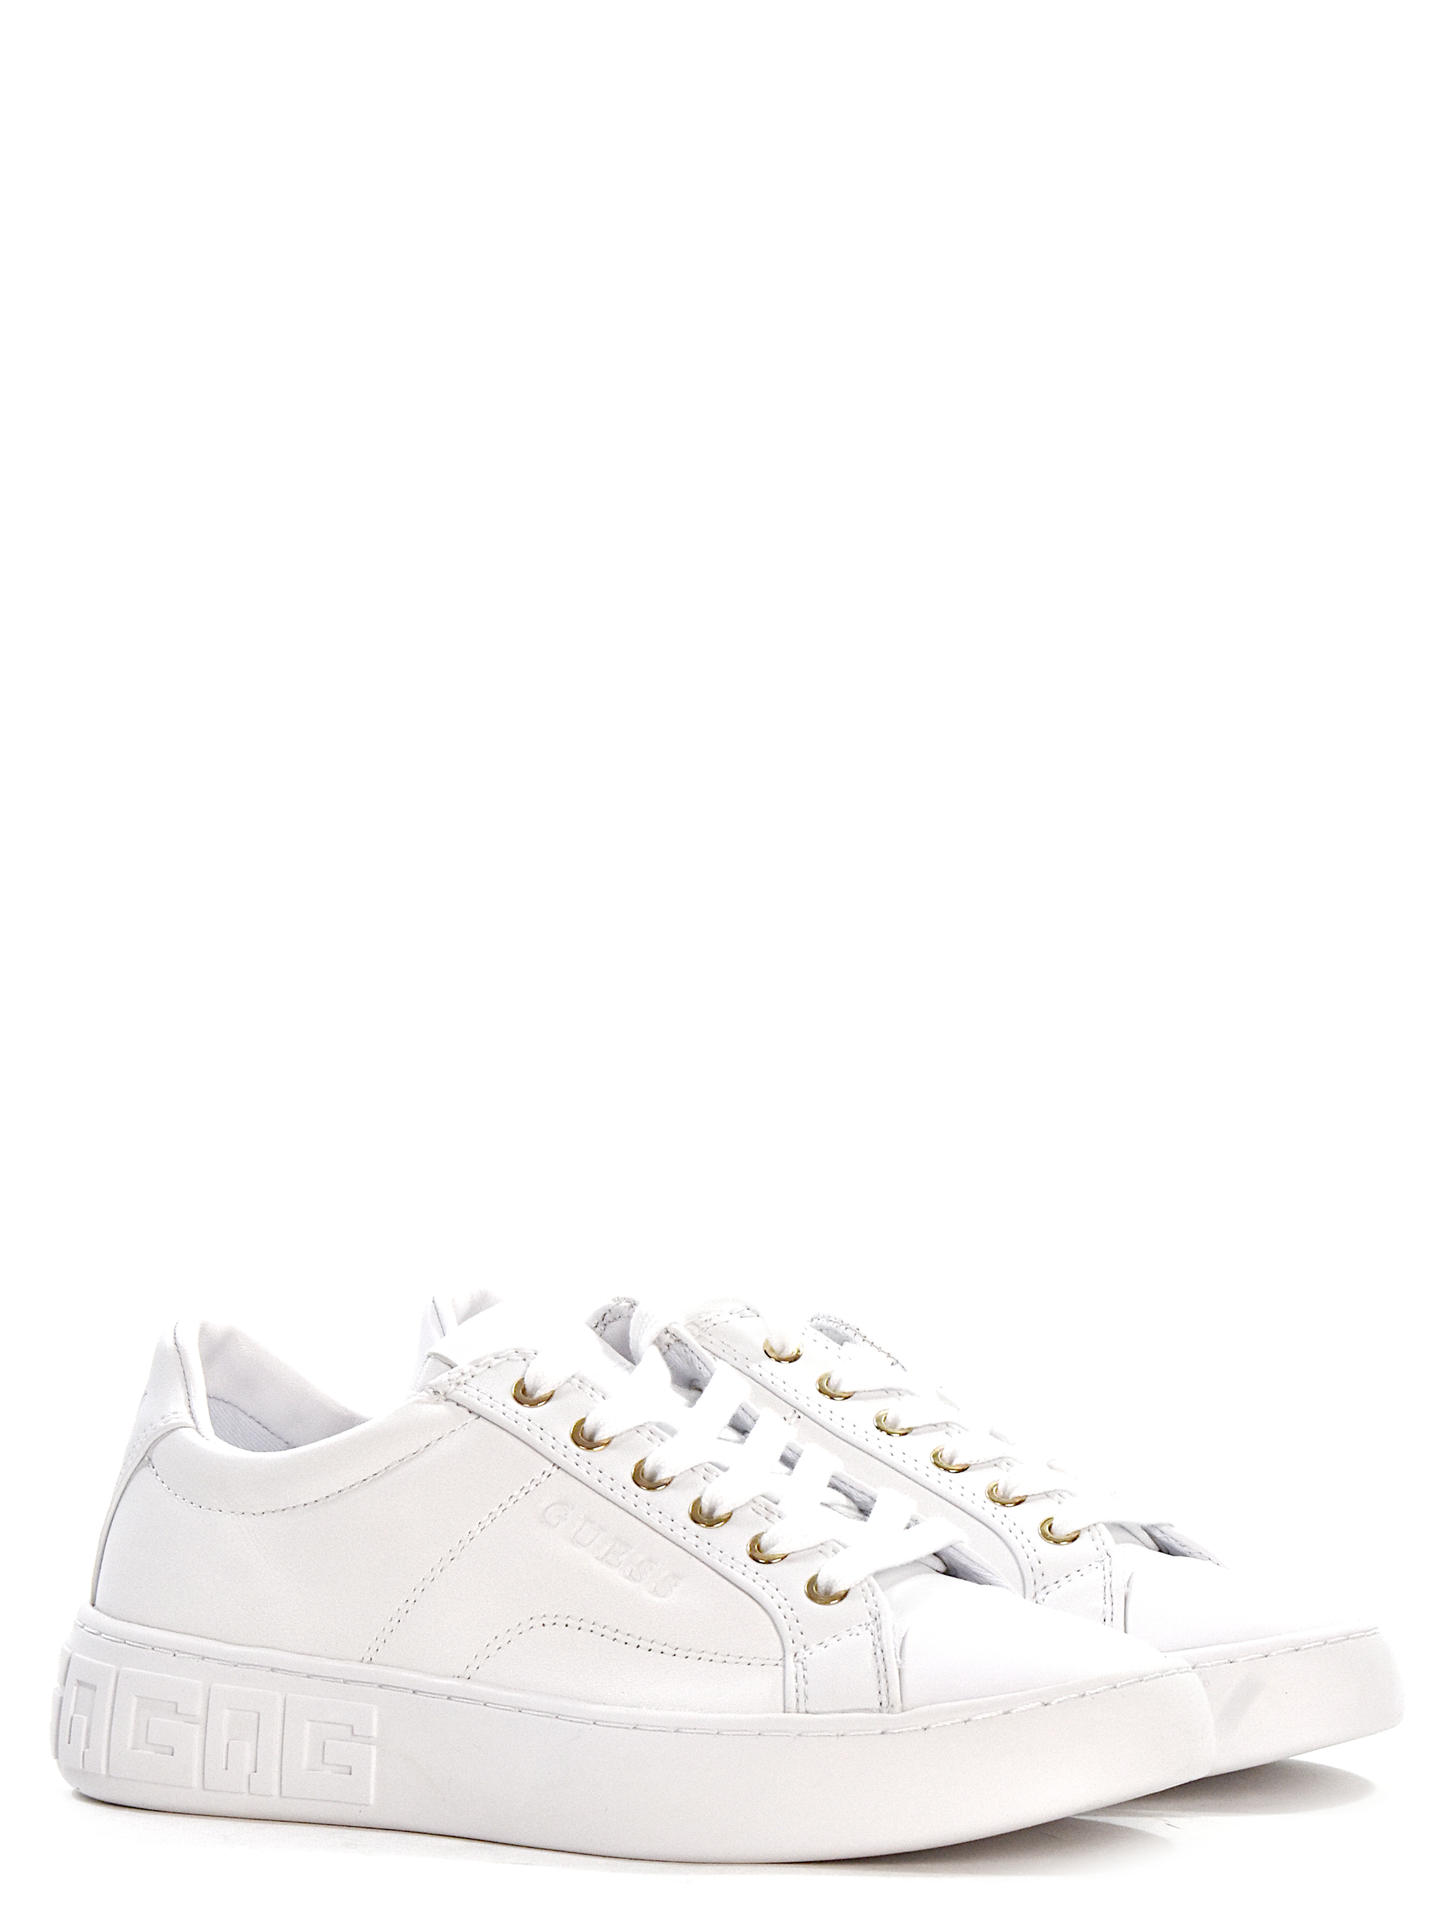 SNEAKERS GUESS FL5INT BIANCO